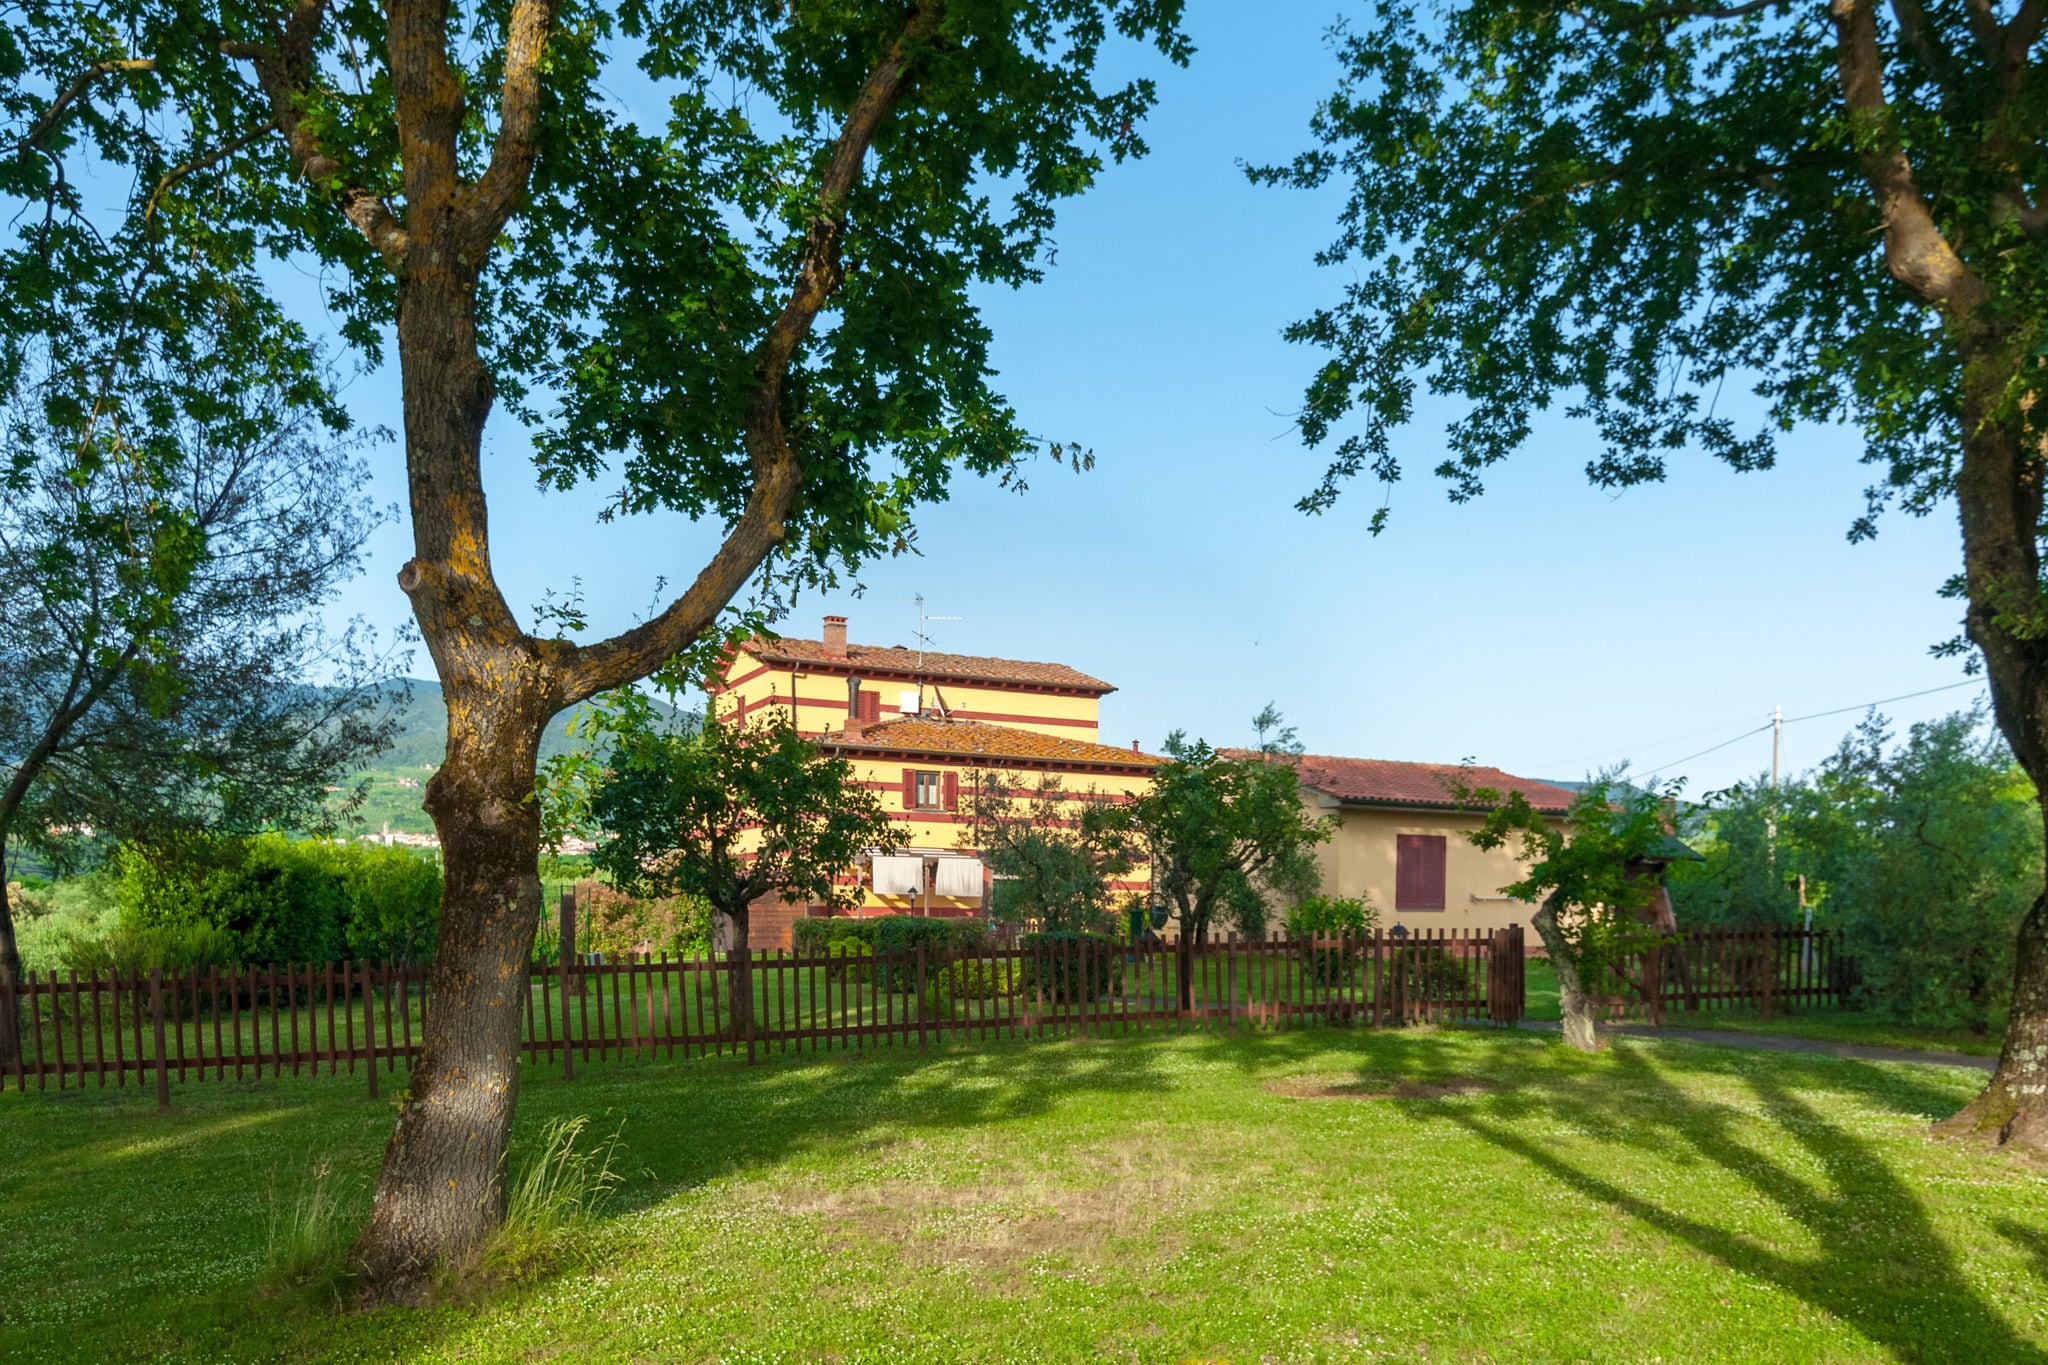 Apartment in country house in olive grove with fenced pool and soccer field